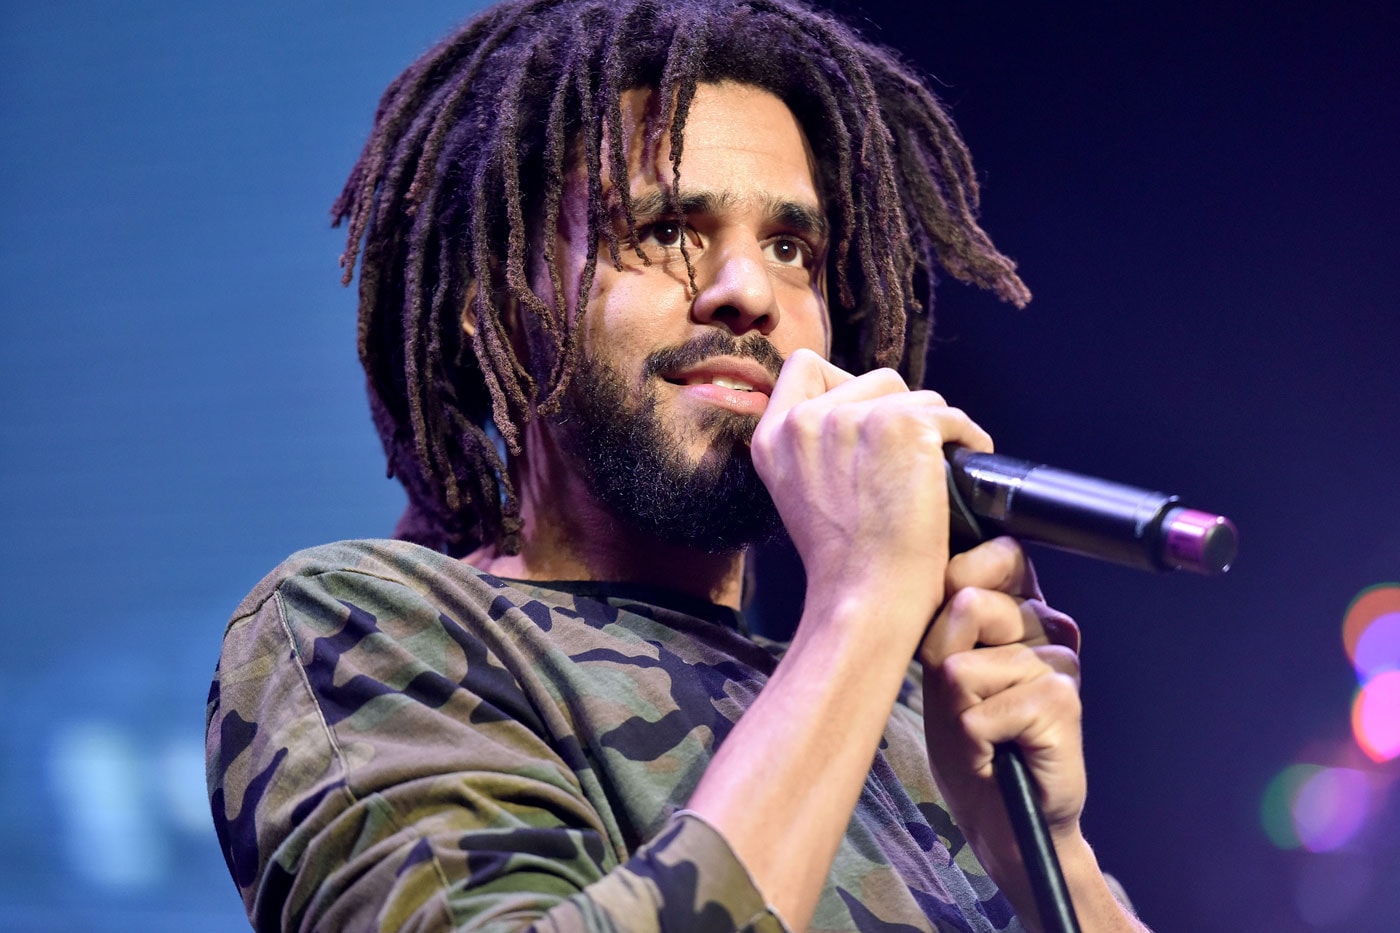 j cole nas xxxtentacion kelis billboard september october 2018 cover story interview profile feature hillary clinton donald trump us presidential election 2016 vote voting